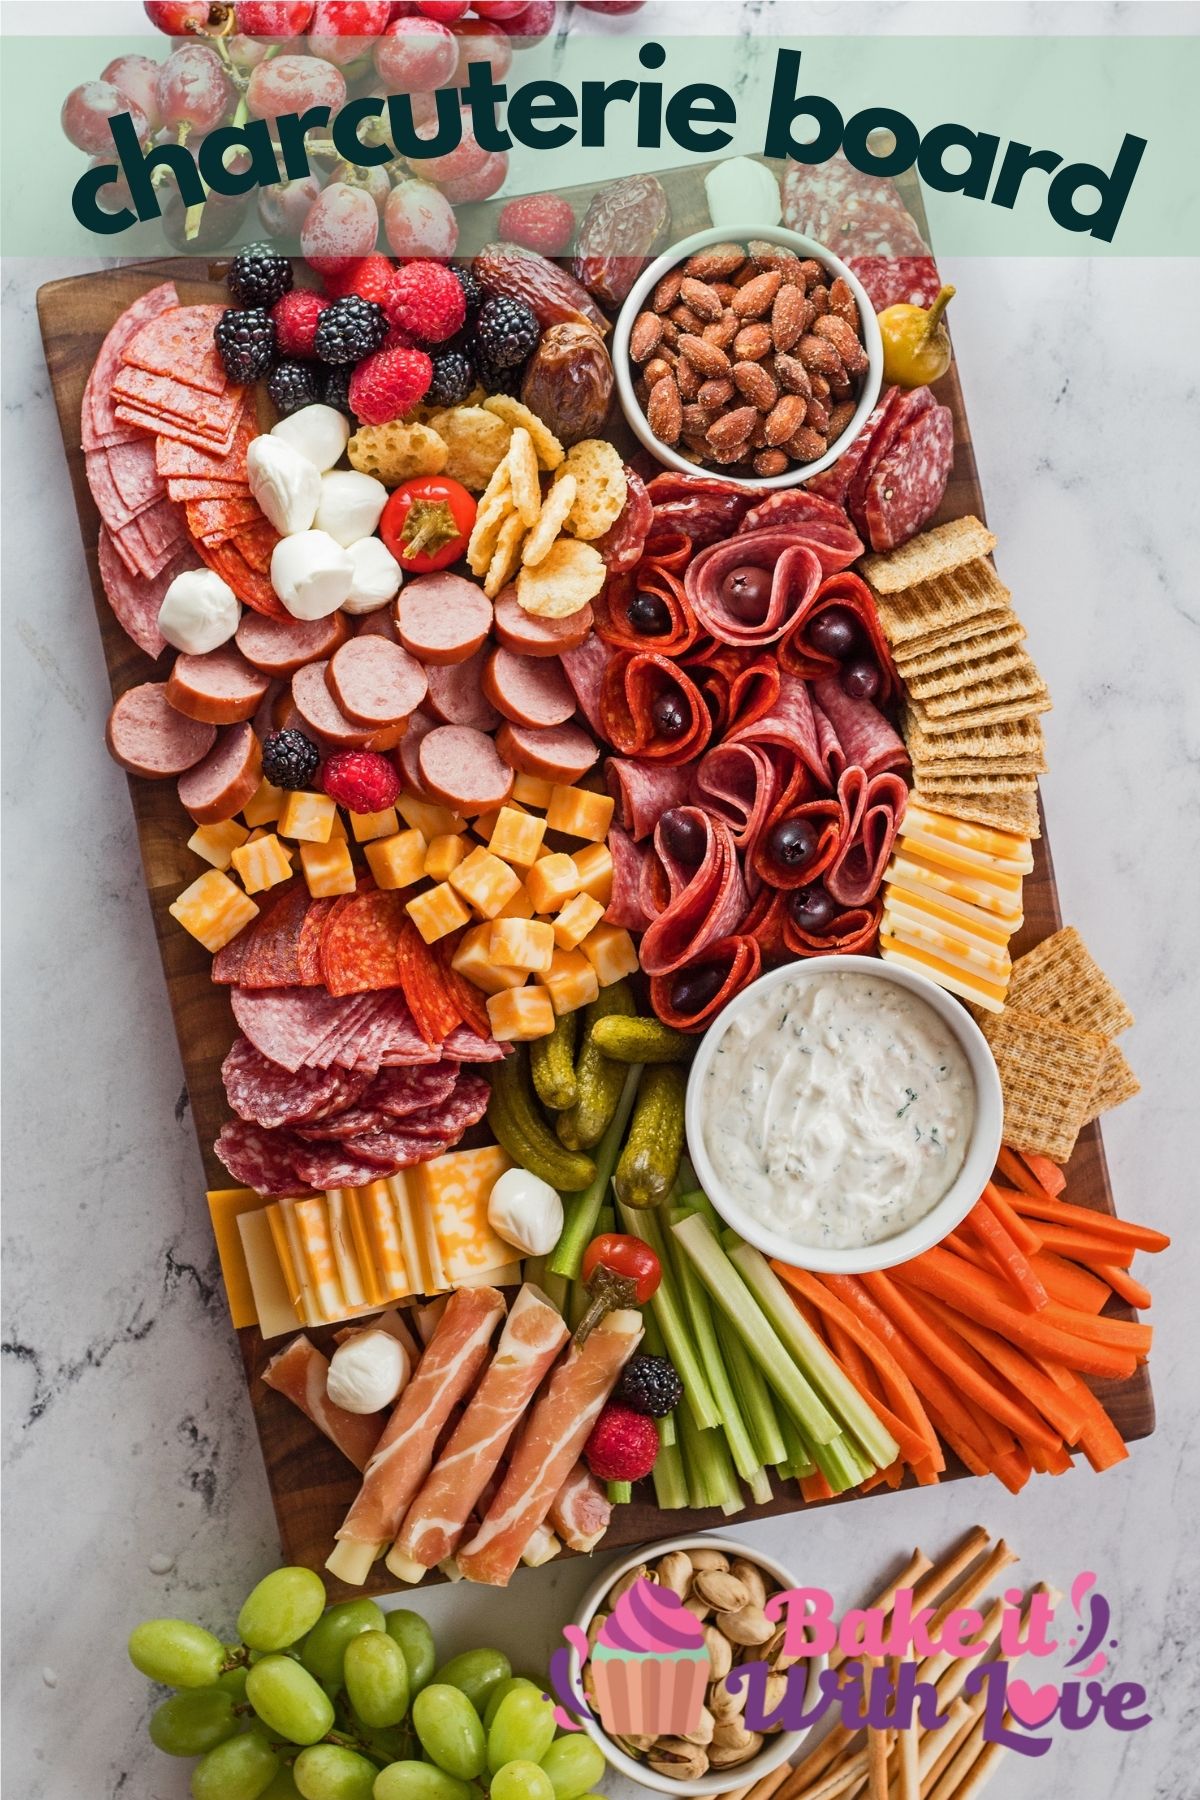 Charcuterie Board (from Simple to Holiday Centerpiece!) Recipes